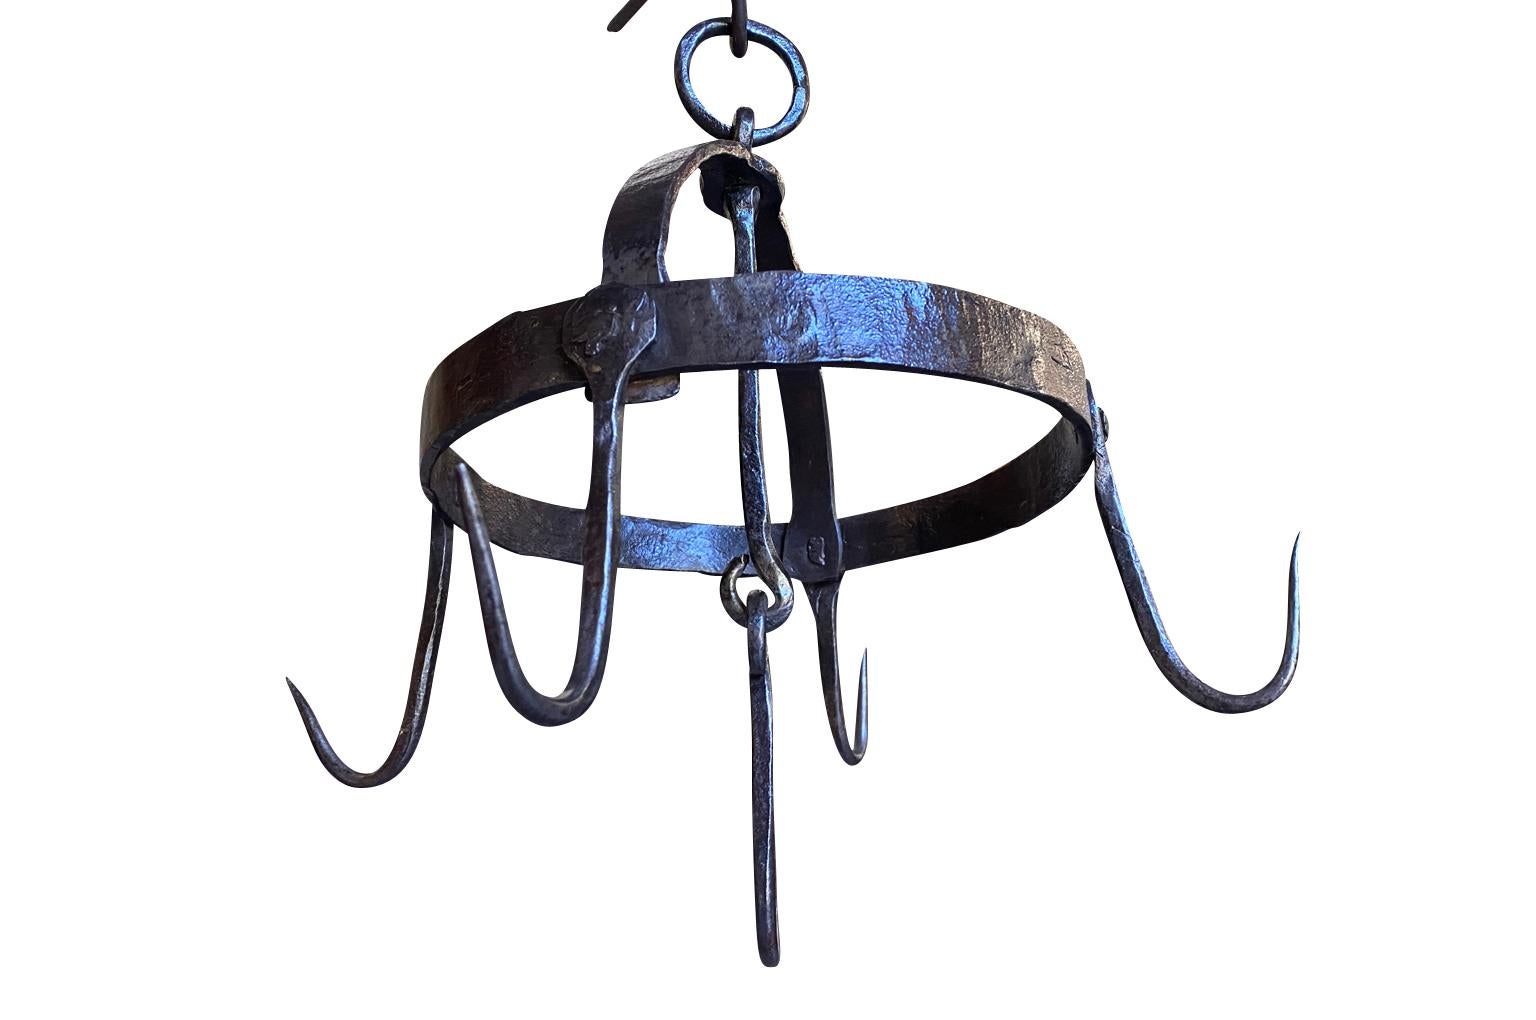 Charming 18th century Butcher Hooks from the Piedmont region of Italy. Wonderfully crafted from hand forged iron. A perfect kitchen accessory or to suspend hanging plants from. 